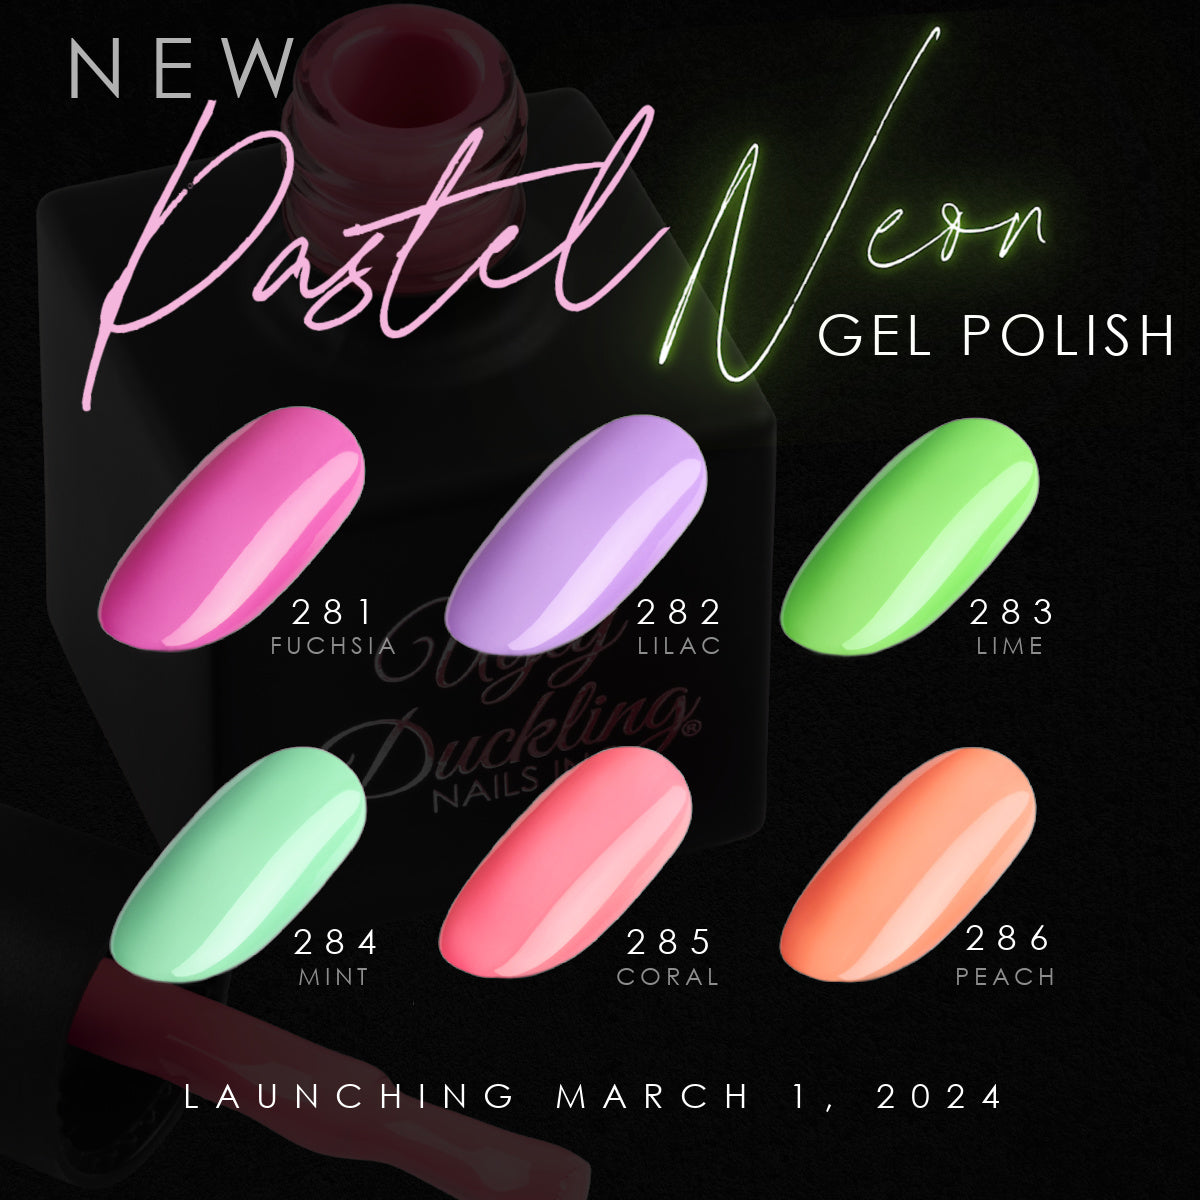 UD Gel Polish - Pastel Neon 6pc Collection 281-286